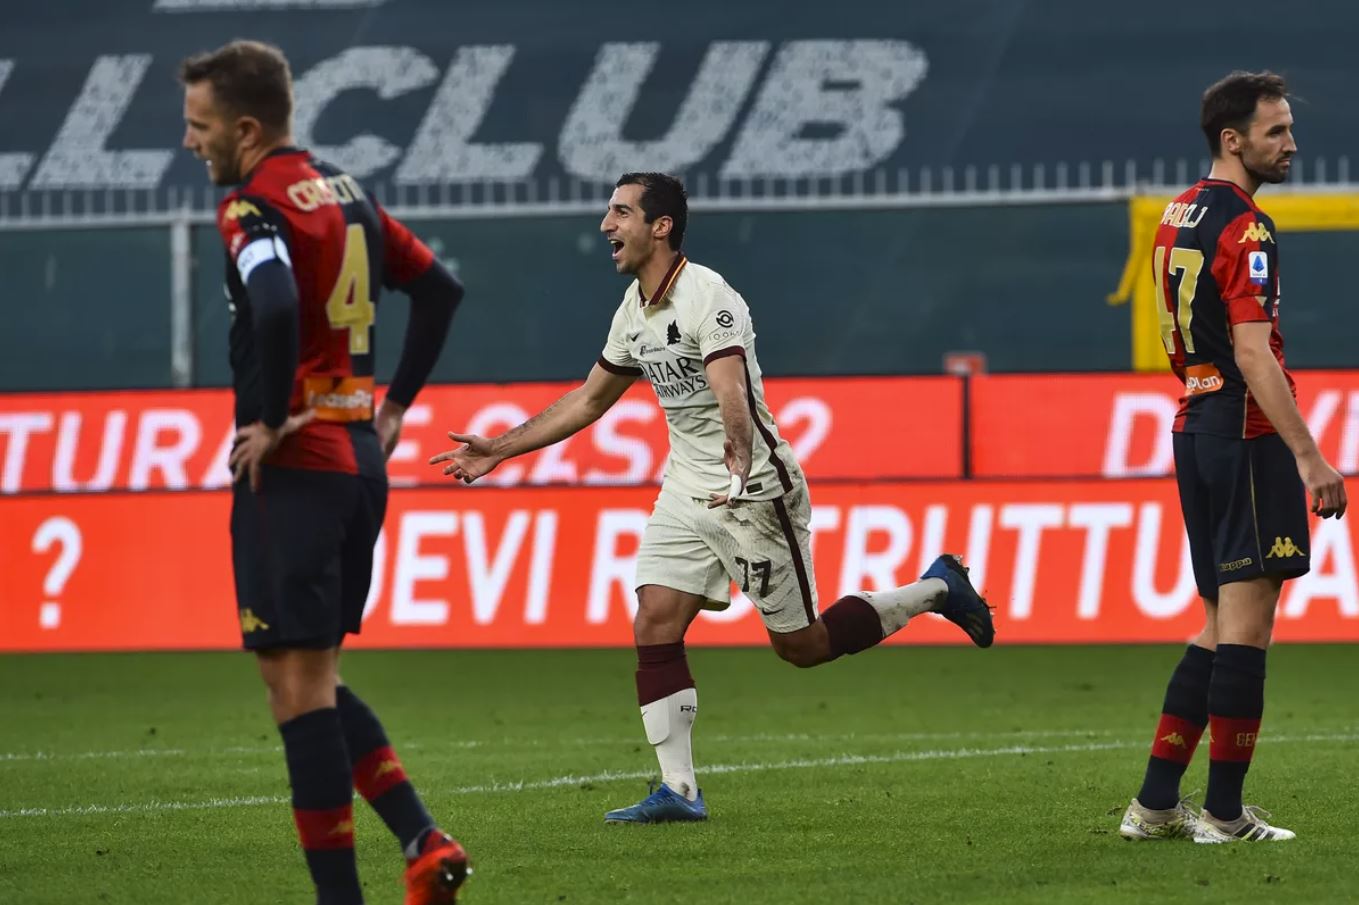 Henrikh Mkhitaryan led Roma to a convincingly win in Genoa scoring a hat-trick in the process